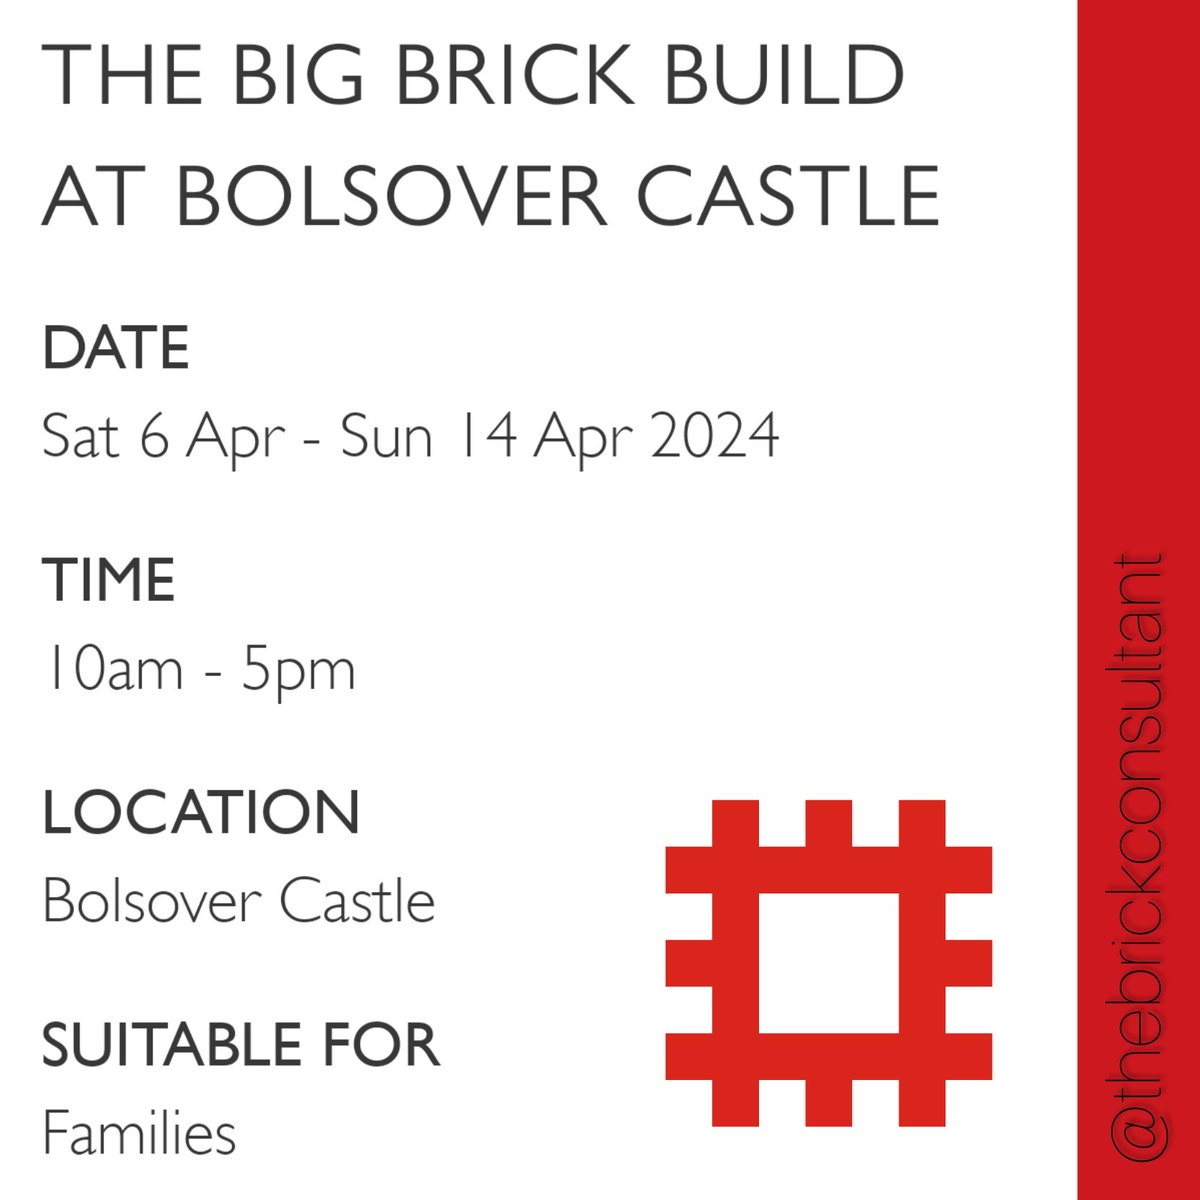 Come along if you are in the area. This event should be lots of fun! #castle #lego #englishheritage #bigbuild #bolsovercastle